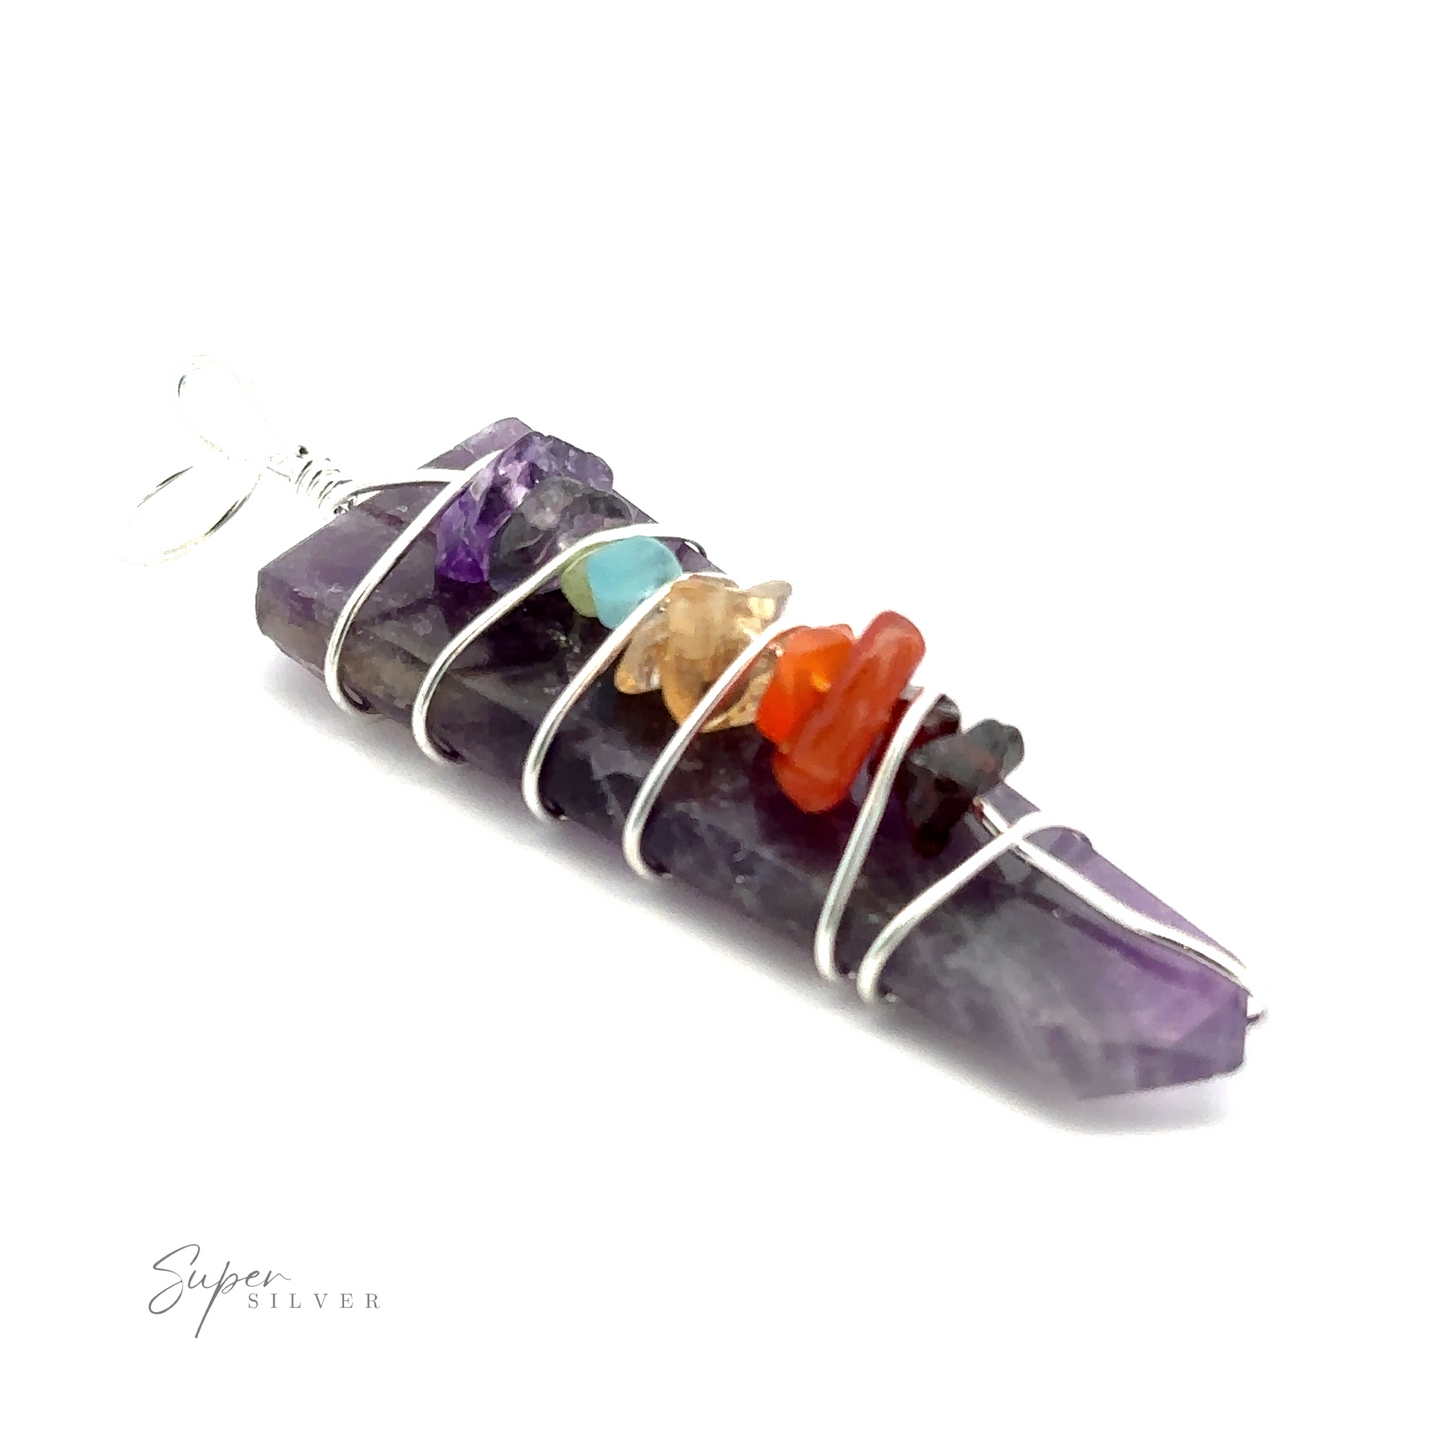 
                  
                    A Stone Slab Wire-Wrapped Chakra Pendant wrapped in silver wire with small colorful chakra stones embedded along the side. The image features the Super Silver watermark.
                  
                